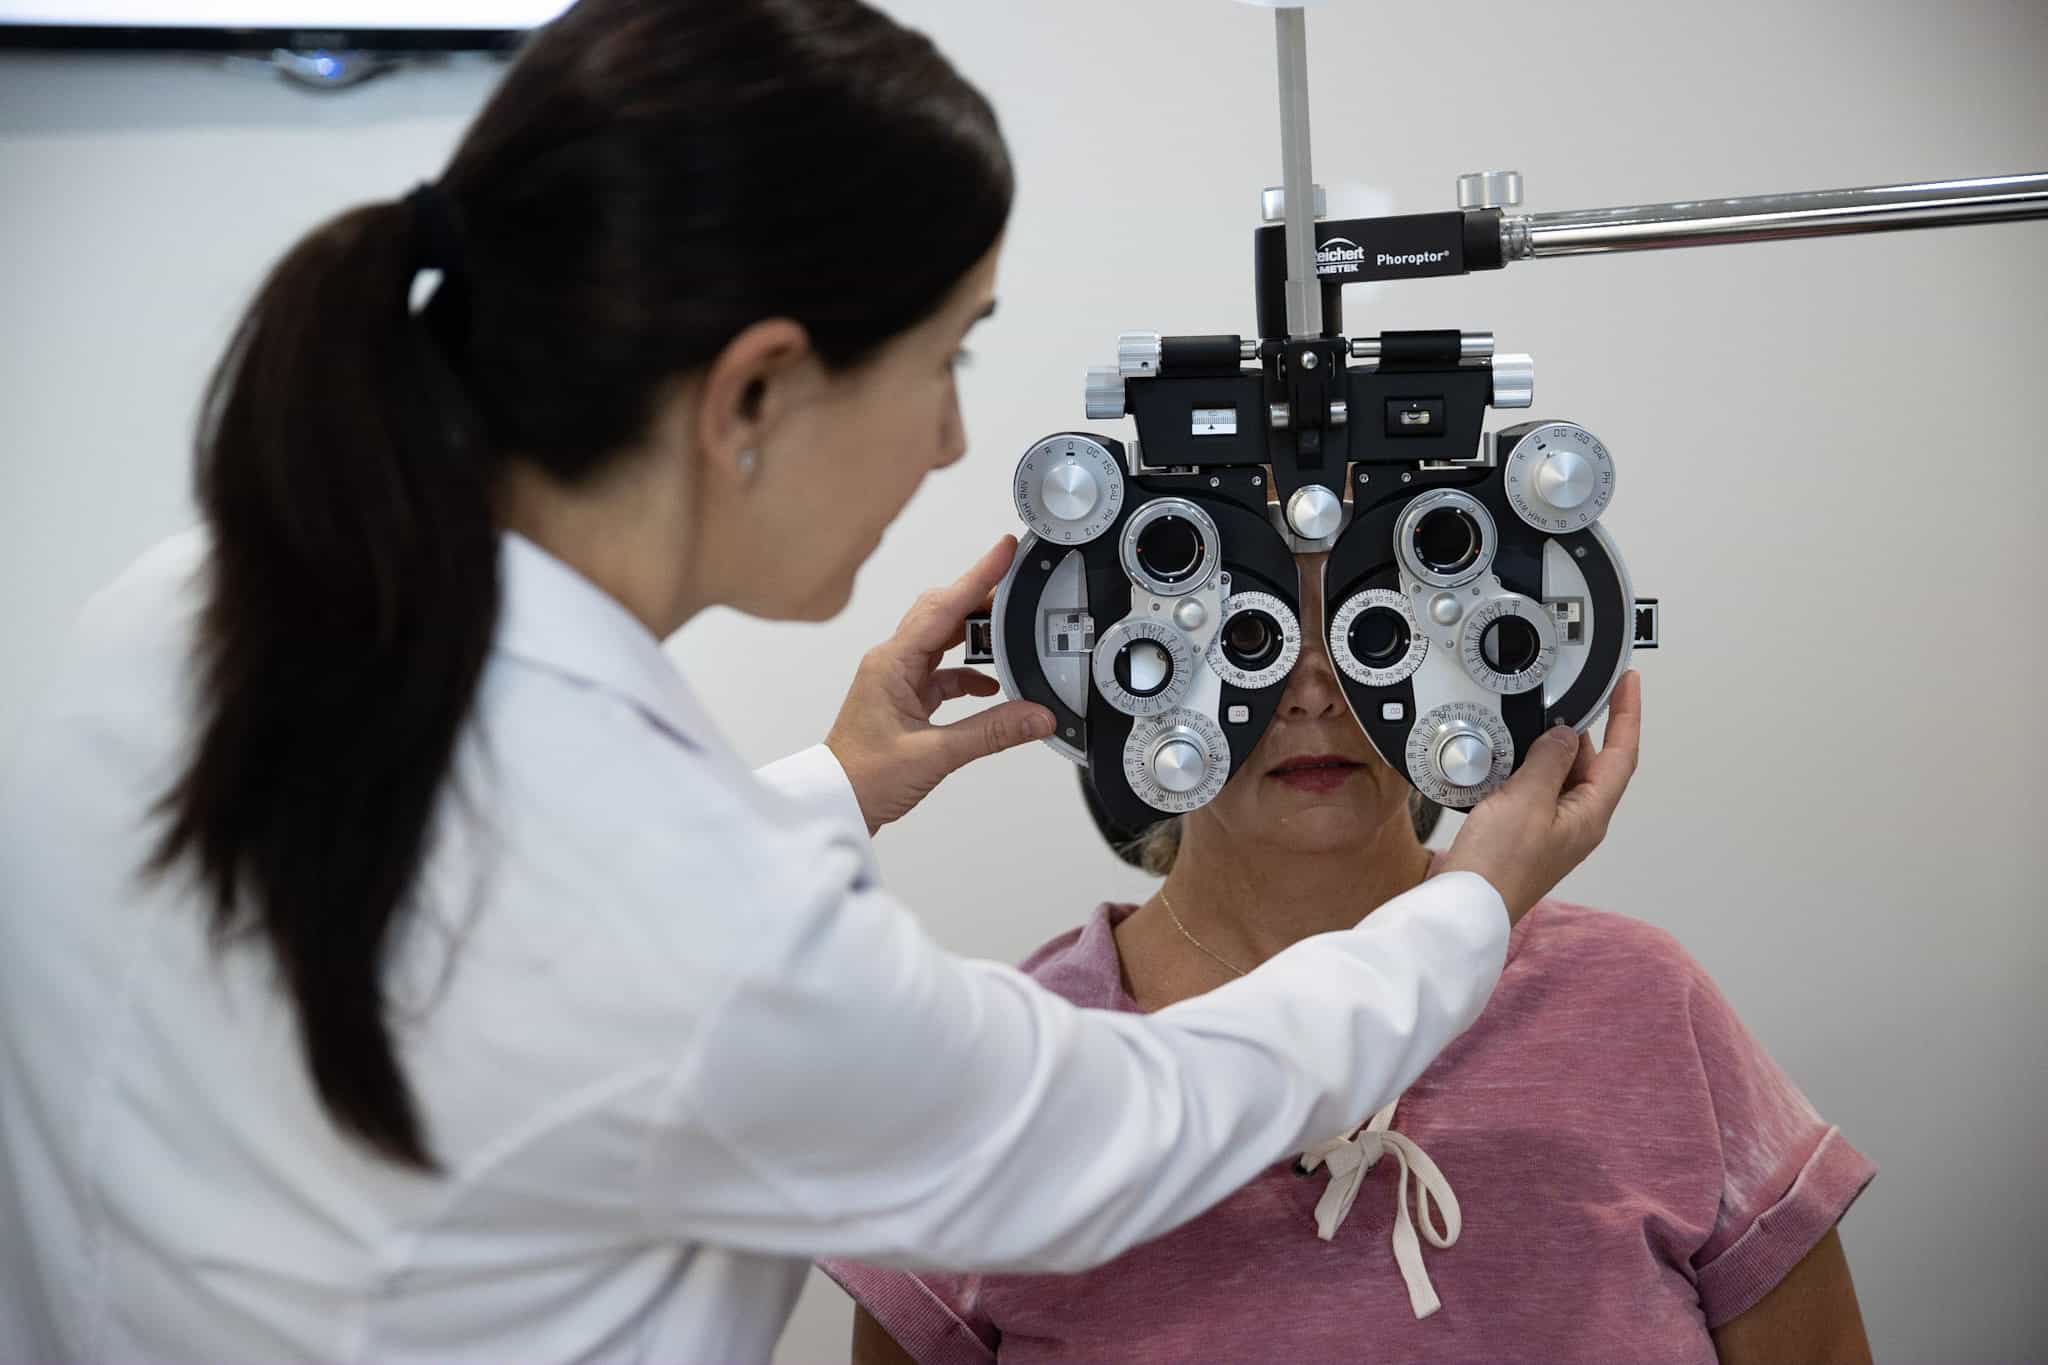 Dr. Helen J. Zervas of Family Eye Care positioning a phoropter up to a female patient to examine her vision.